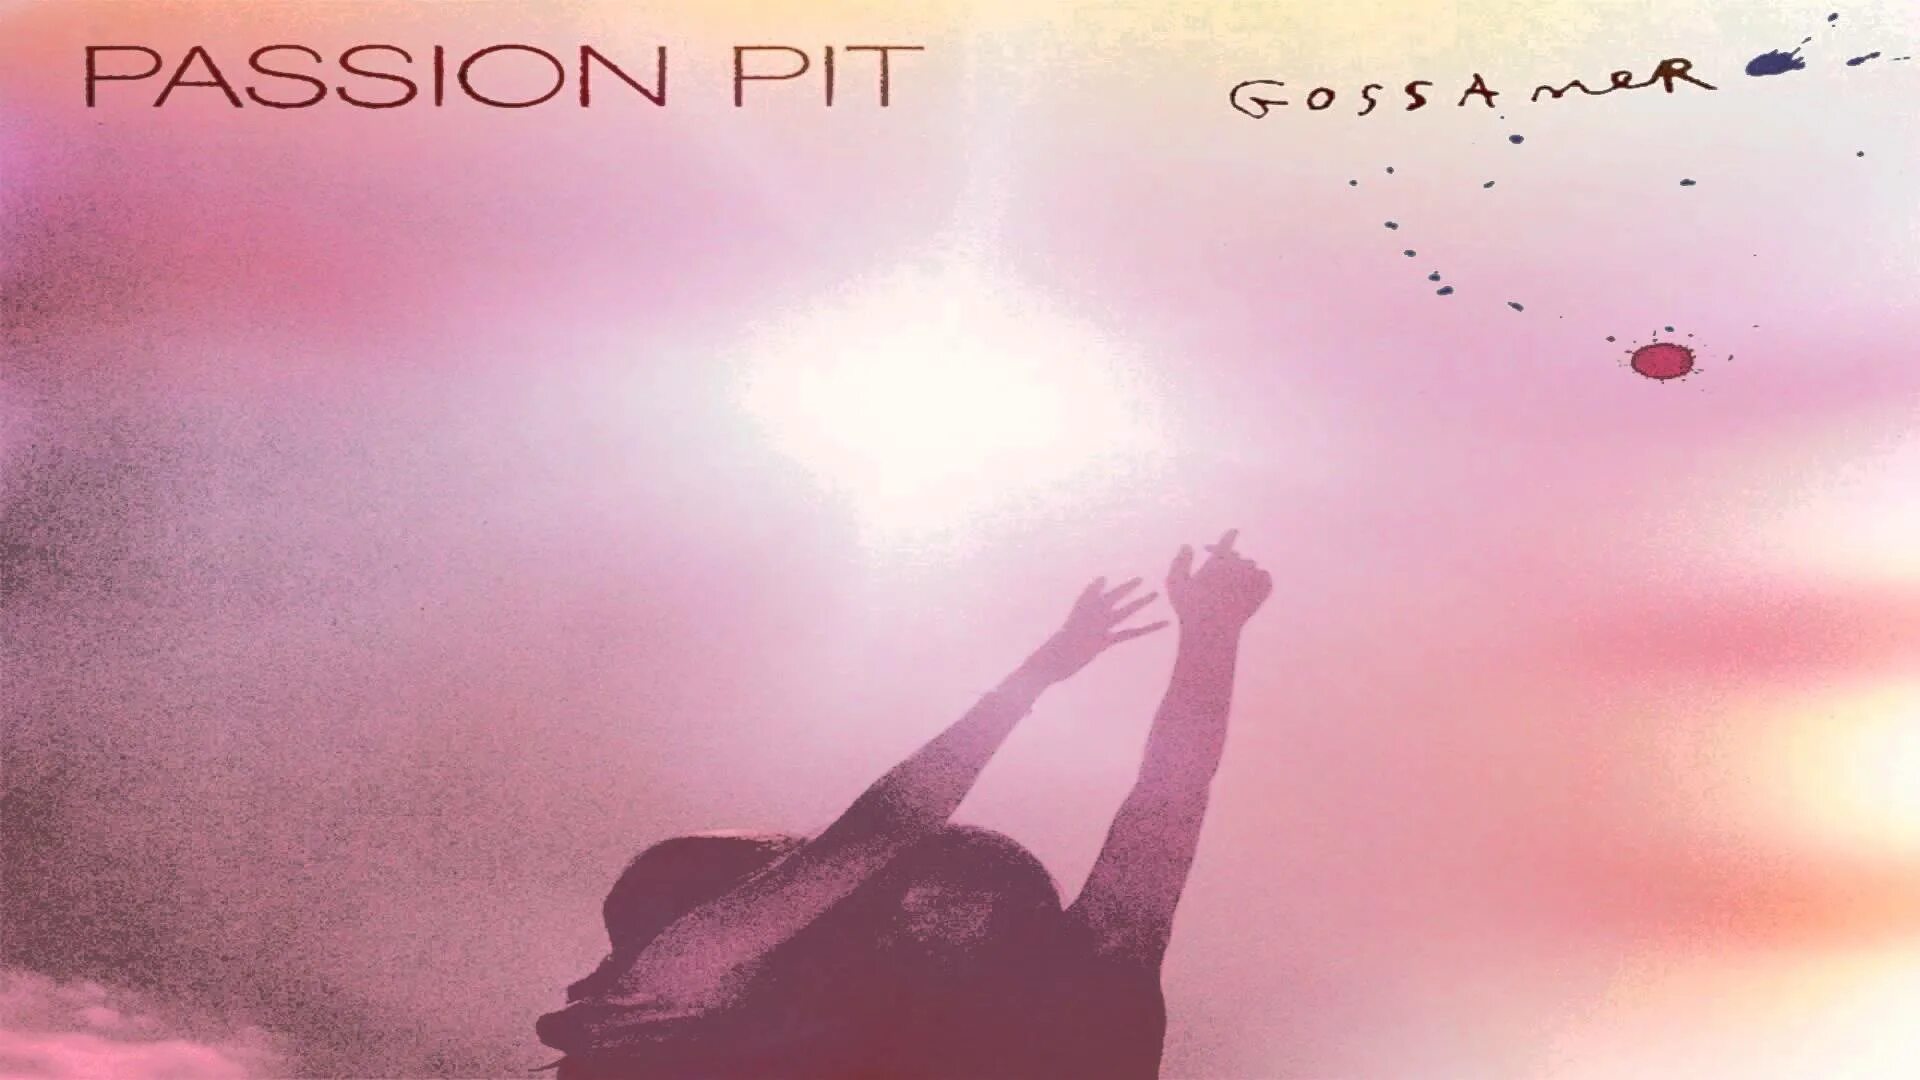 Passion pit. Carried away passion Pit. Gossamer певец. Мем passion Pit - carried away.